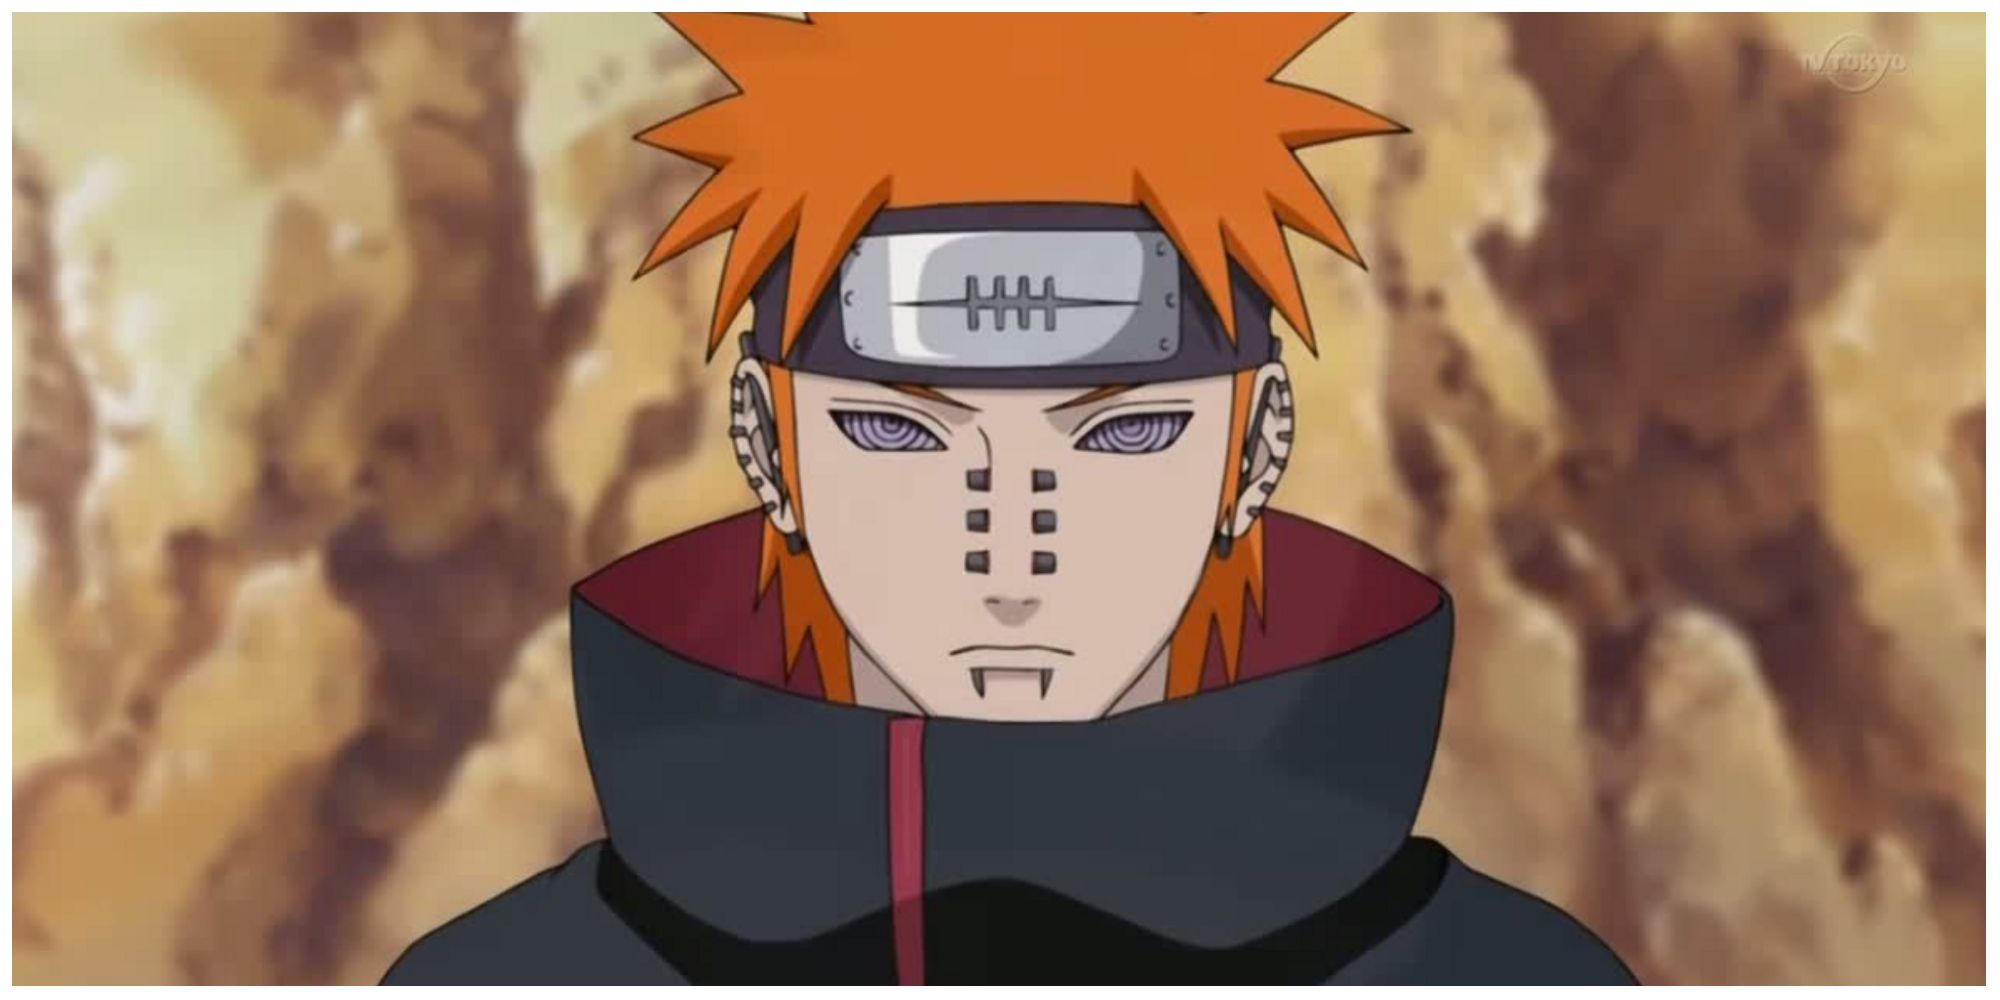 Pain after he arrives in Konoha in Naruto anime.